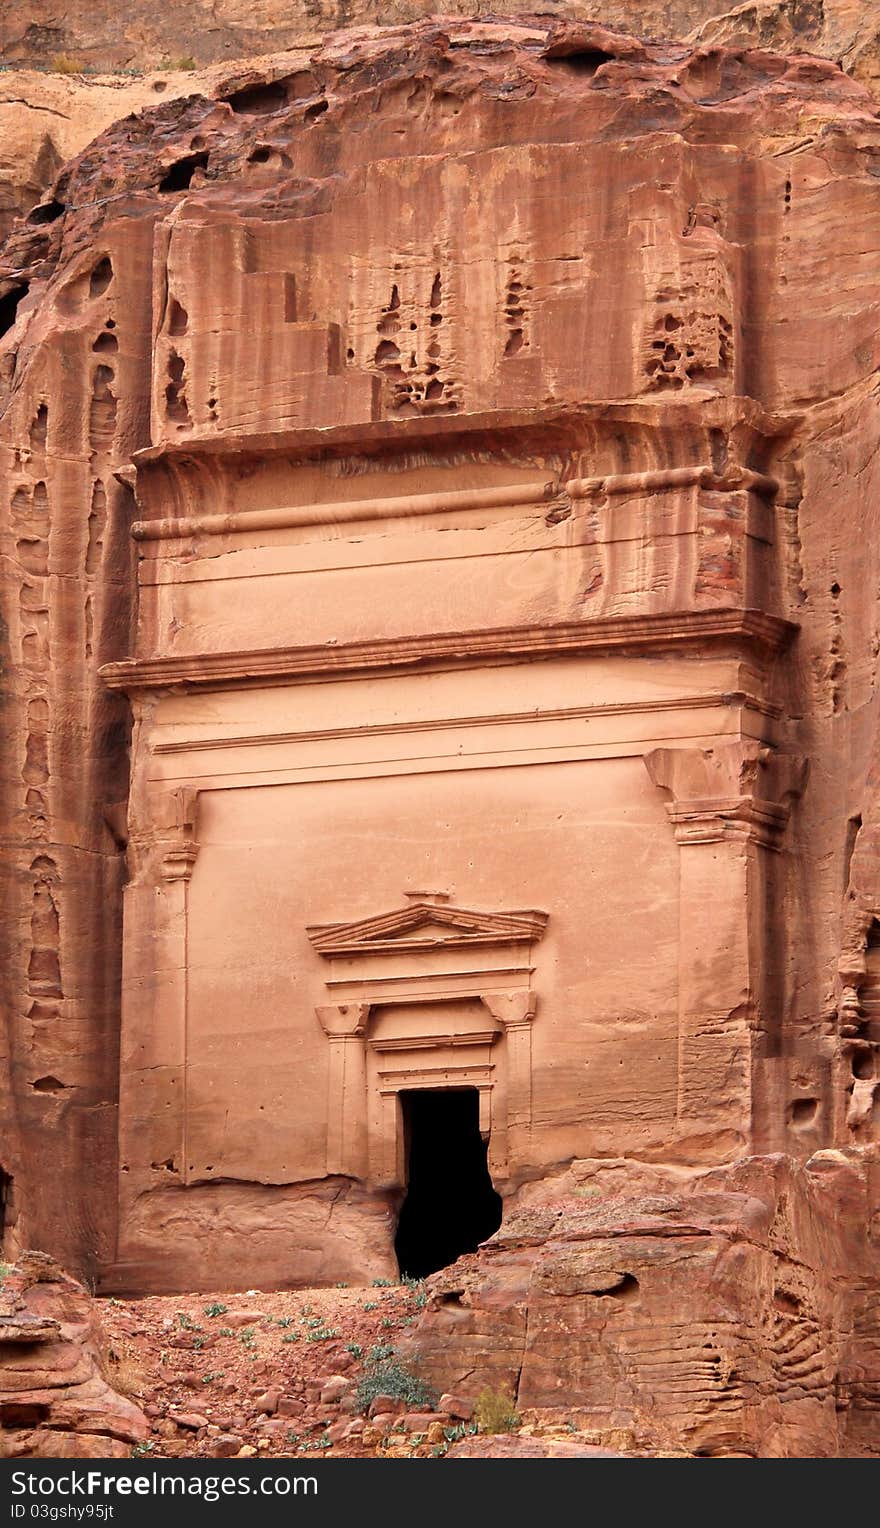 Royal Tomb in the lost rock city of Petra, Jordan. Petra's temples, tombs, theaters and other buildings are scattered over 400 square miles. UNESCO world heritage site